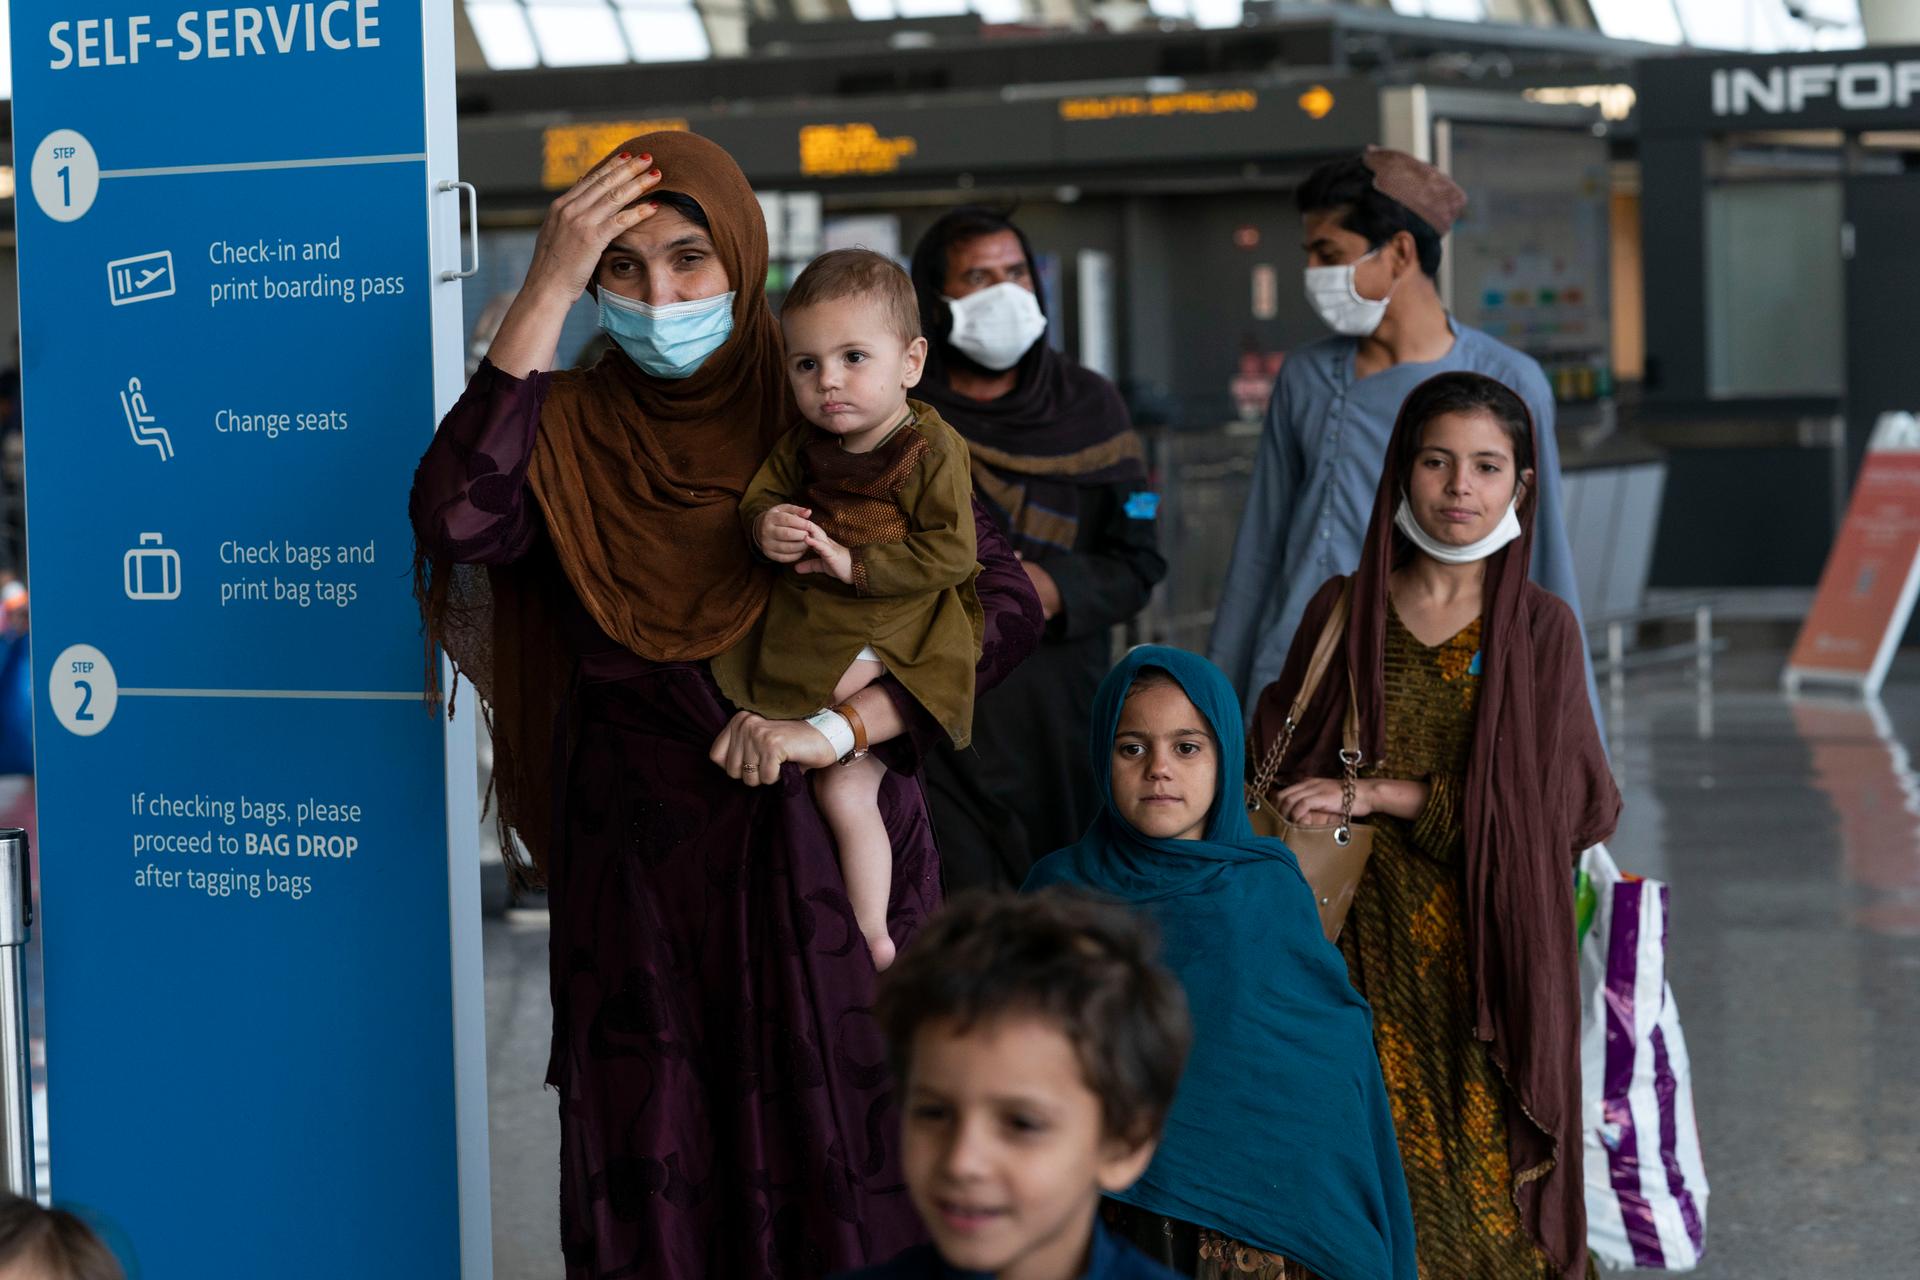 Families evacuated from Kabul, Afghanistan, walk through the terminal before boarding a bus after they arrived at Washington Dulles International Airport, in Chantilly, Virginia, Aug. 27, 2021.